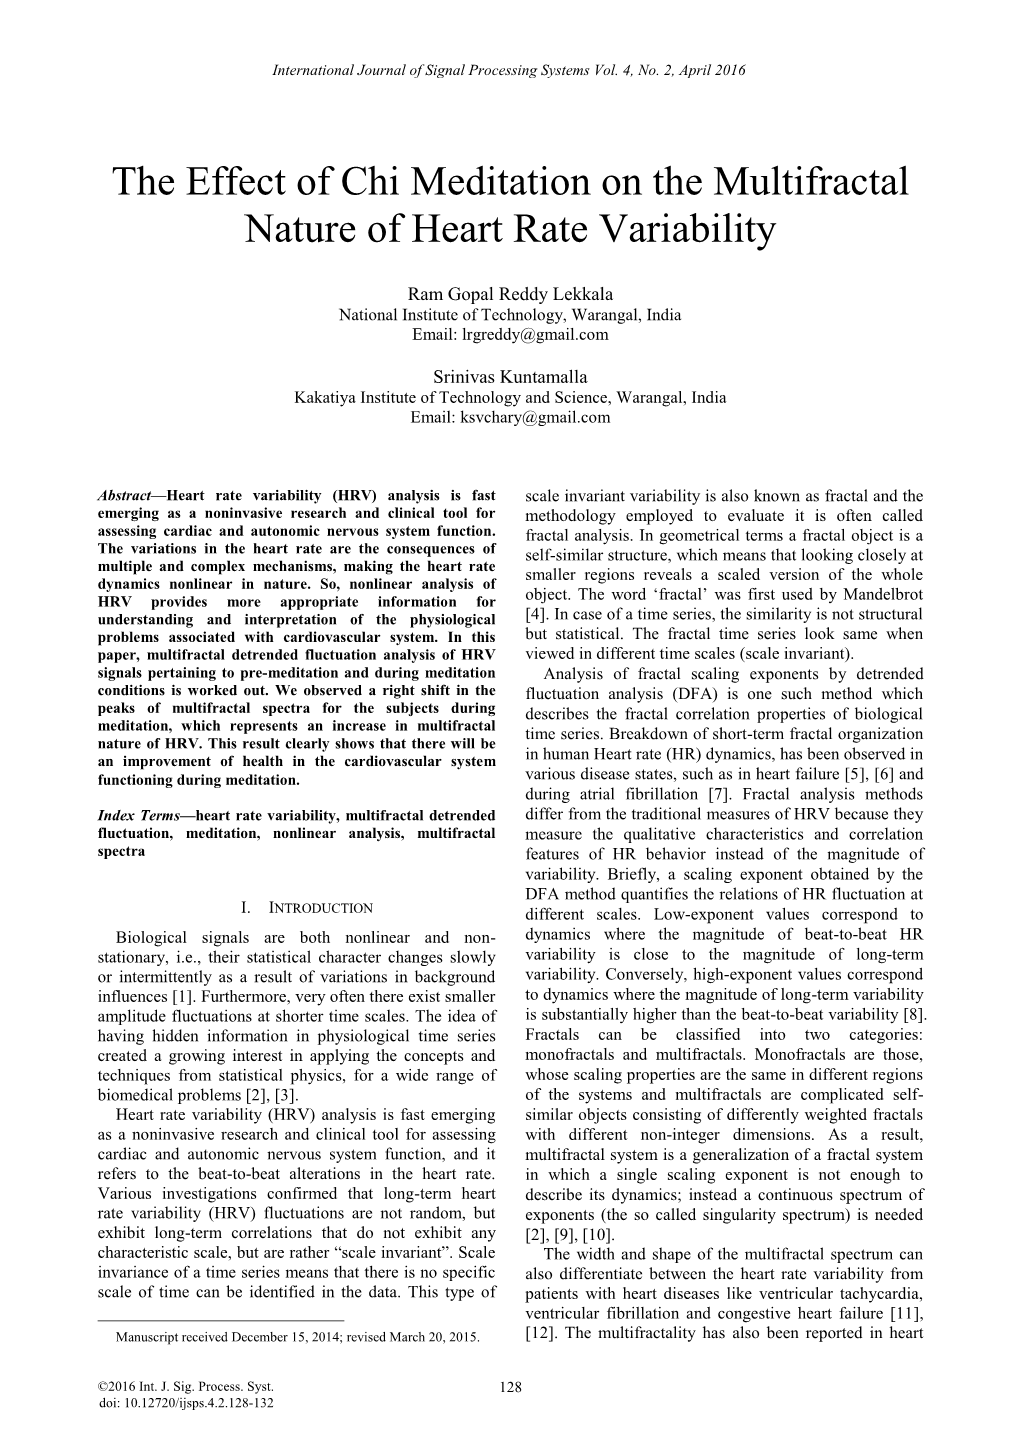 The Effect of Chi Meditation on the Multifractal Nature of Heart Rate Variability